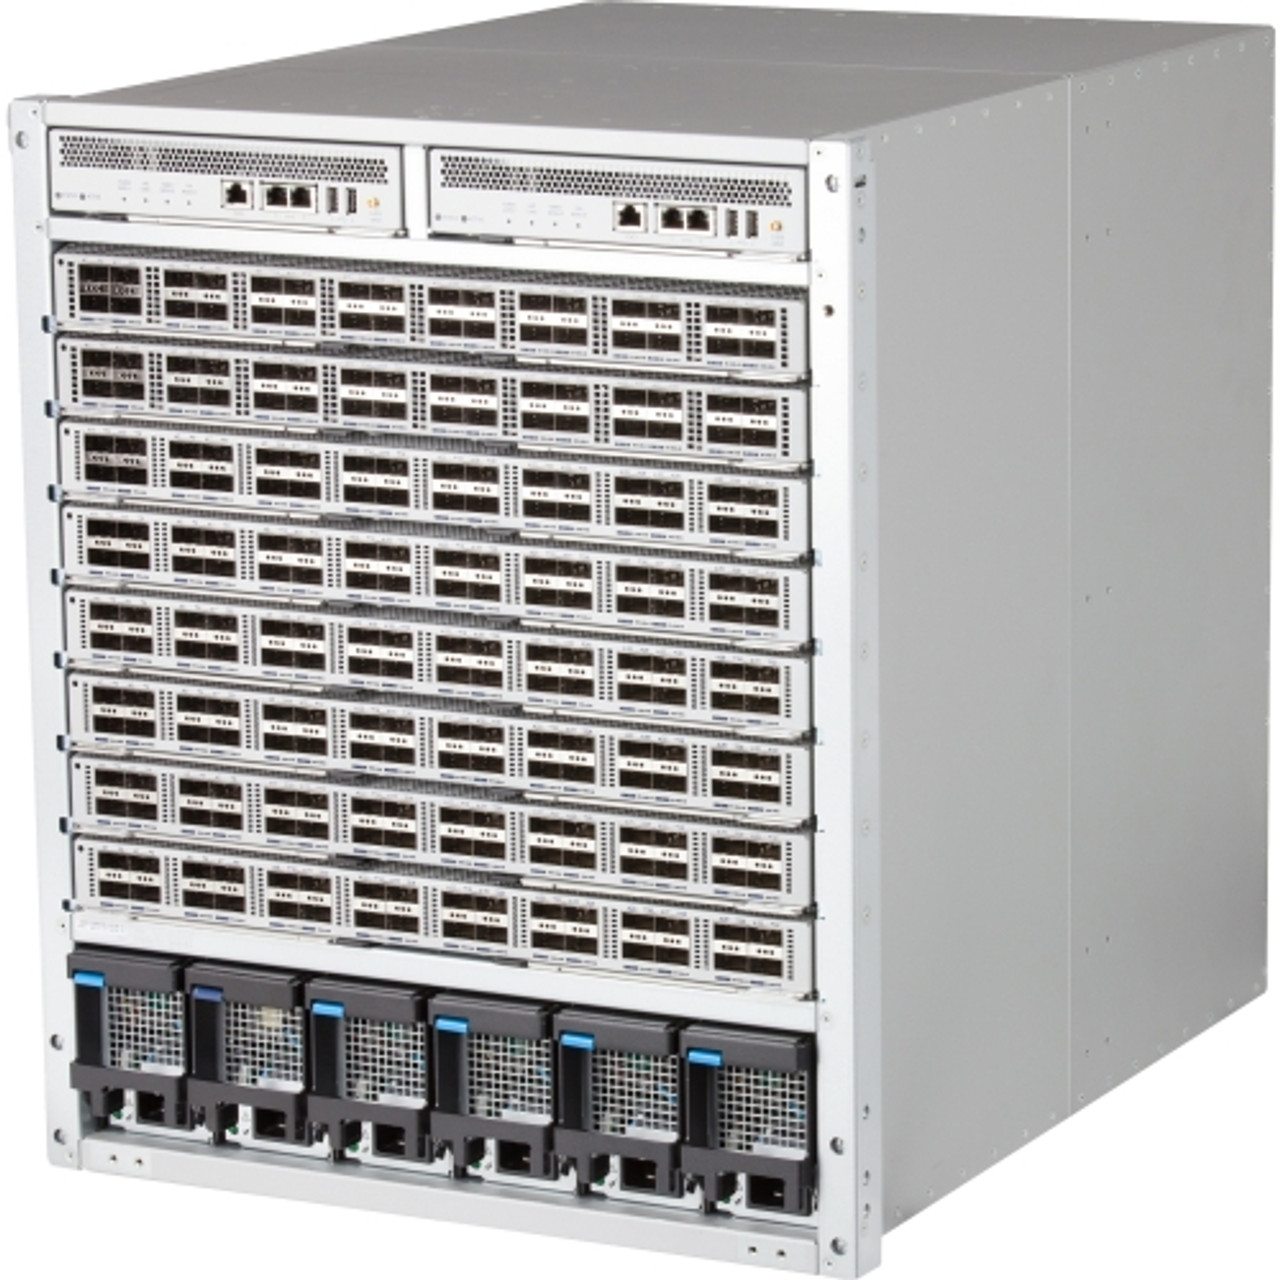 JH930A HP Arista 7308XT Switch Chassis 8 Expansion Slot Manageable Modular (Refurbished)